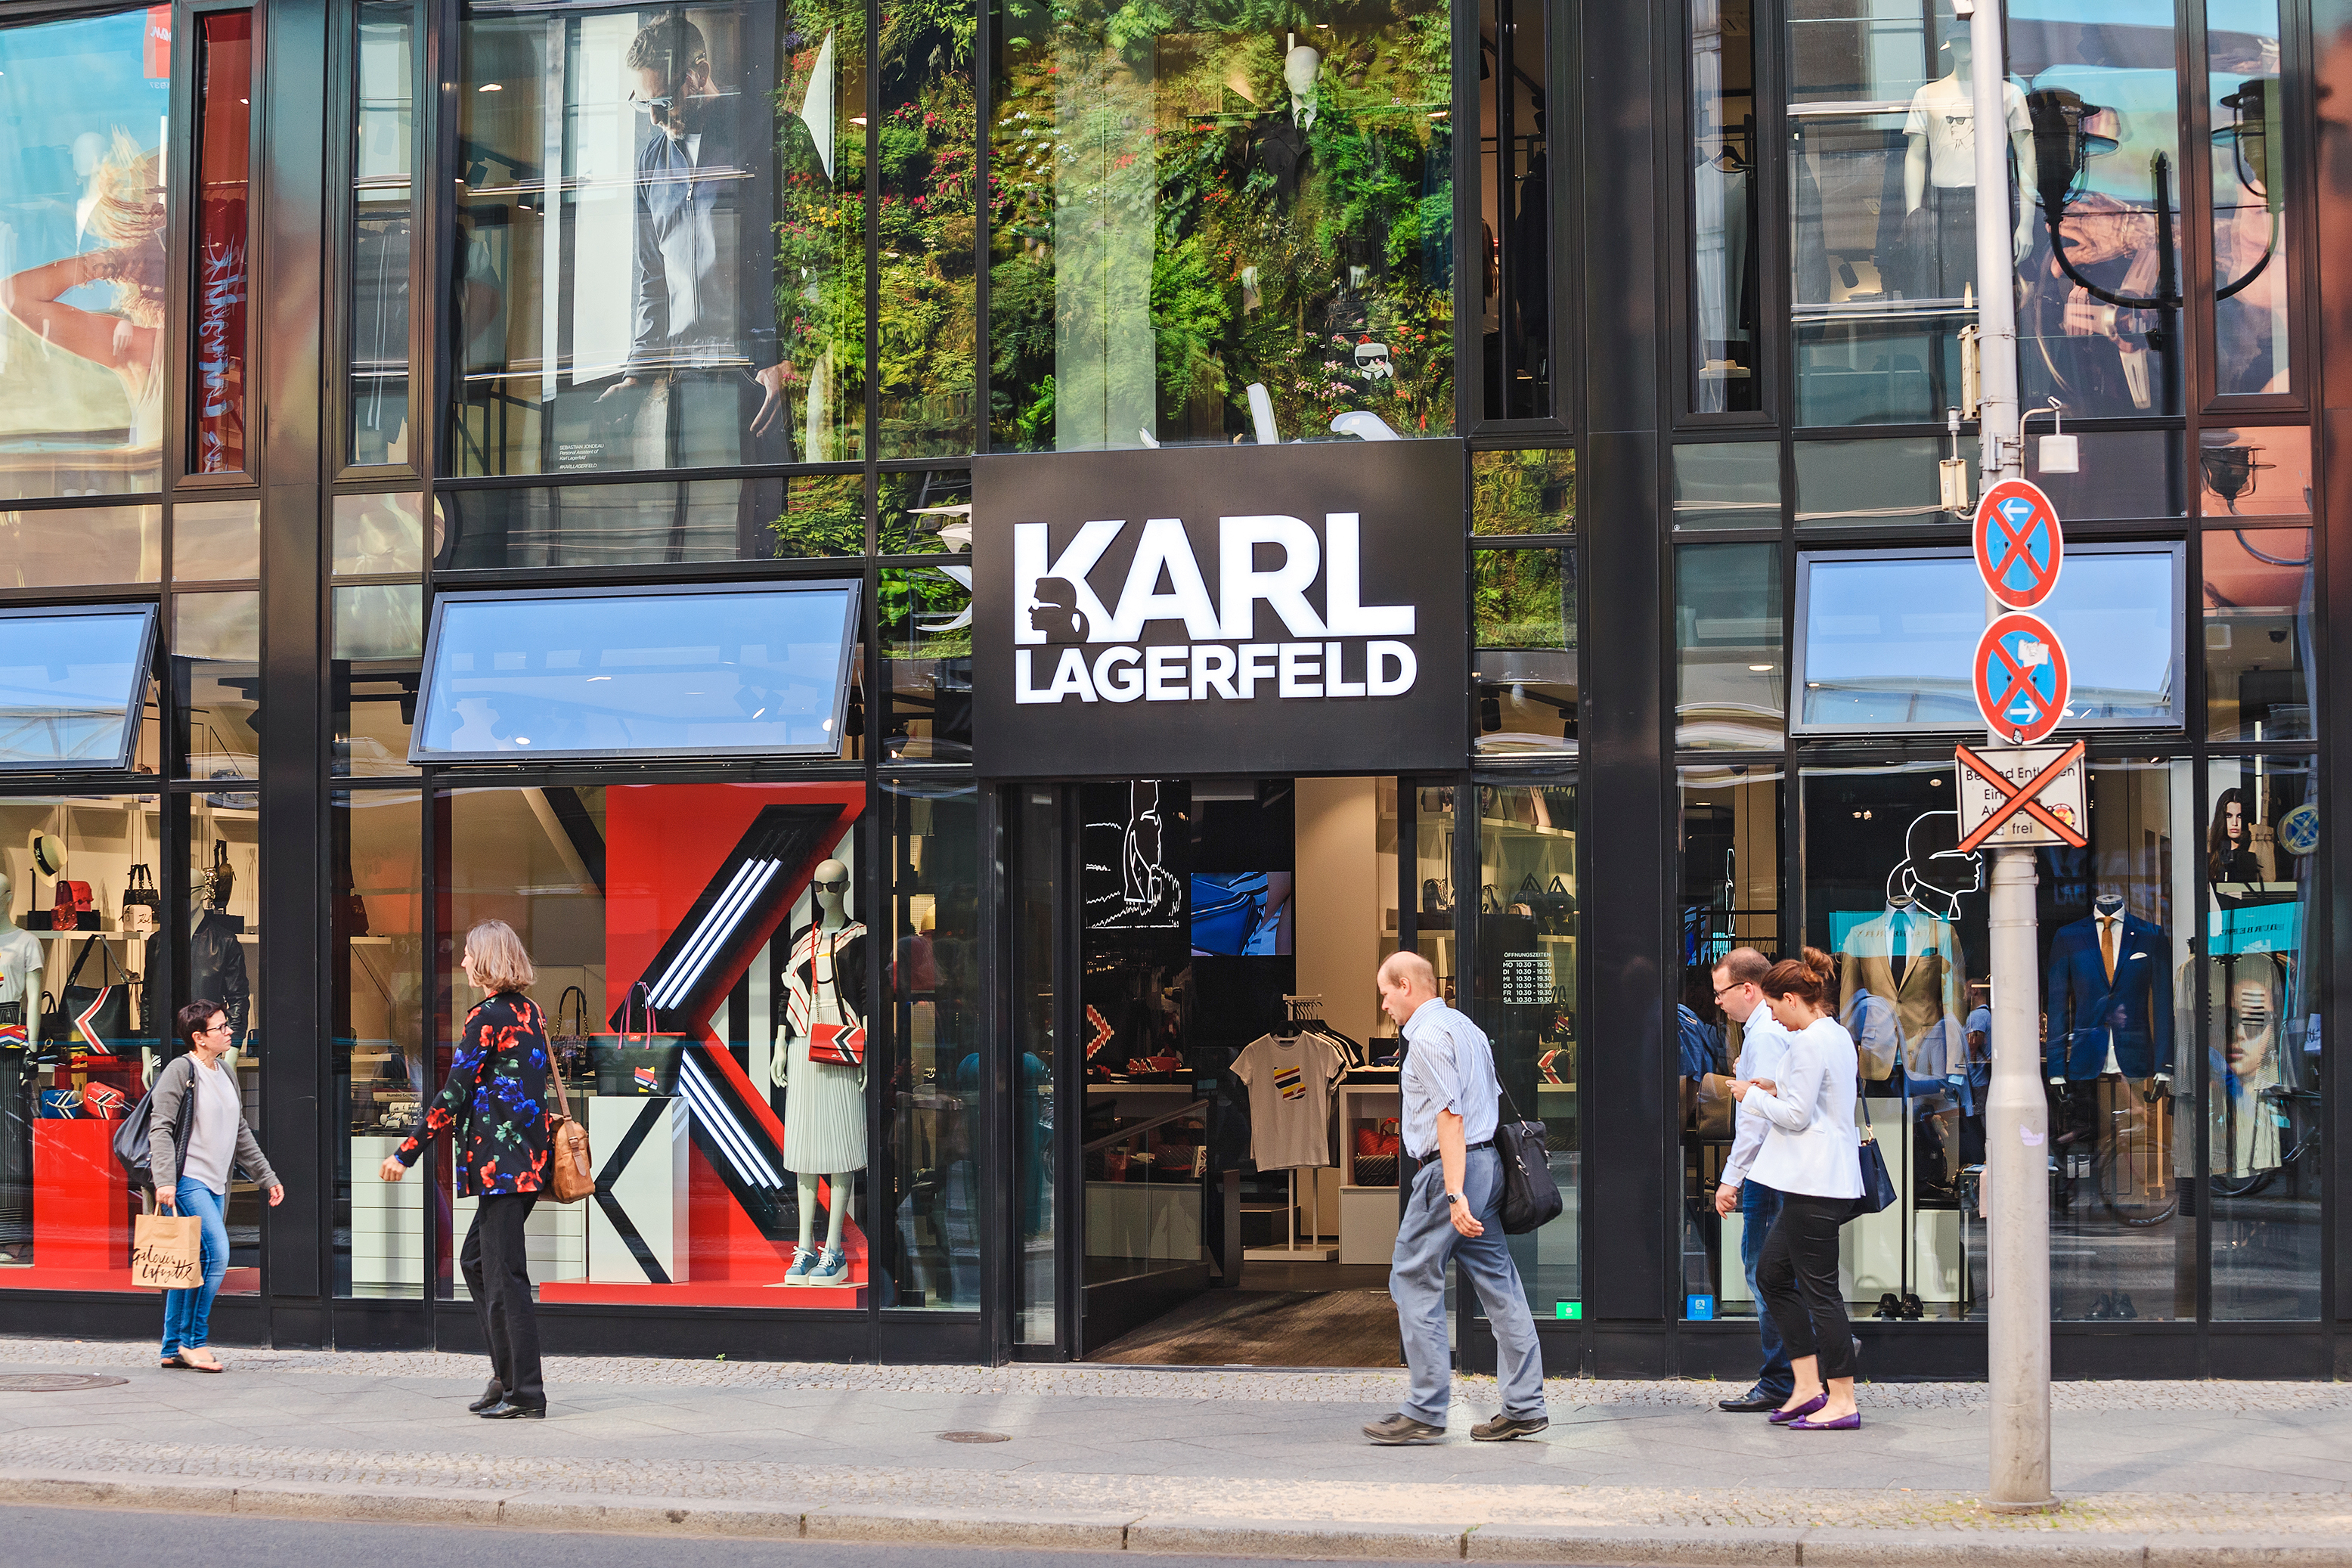 G-III Apparel to buy Karl Lagerfeld brand in $210 million all-cash deal